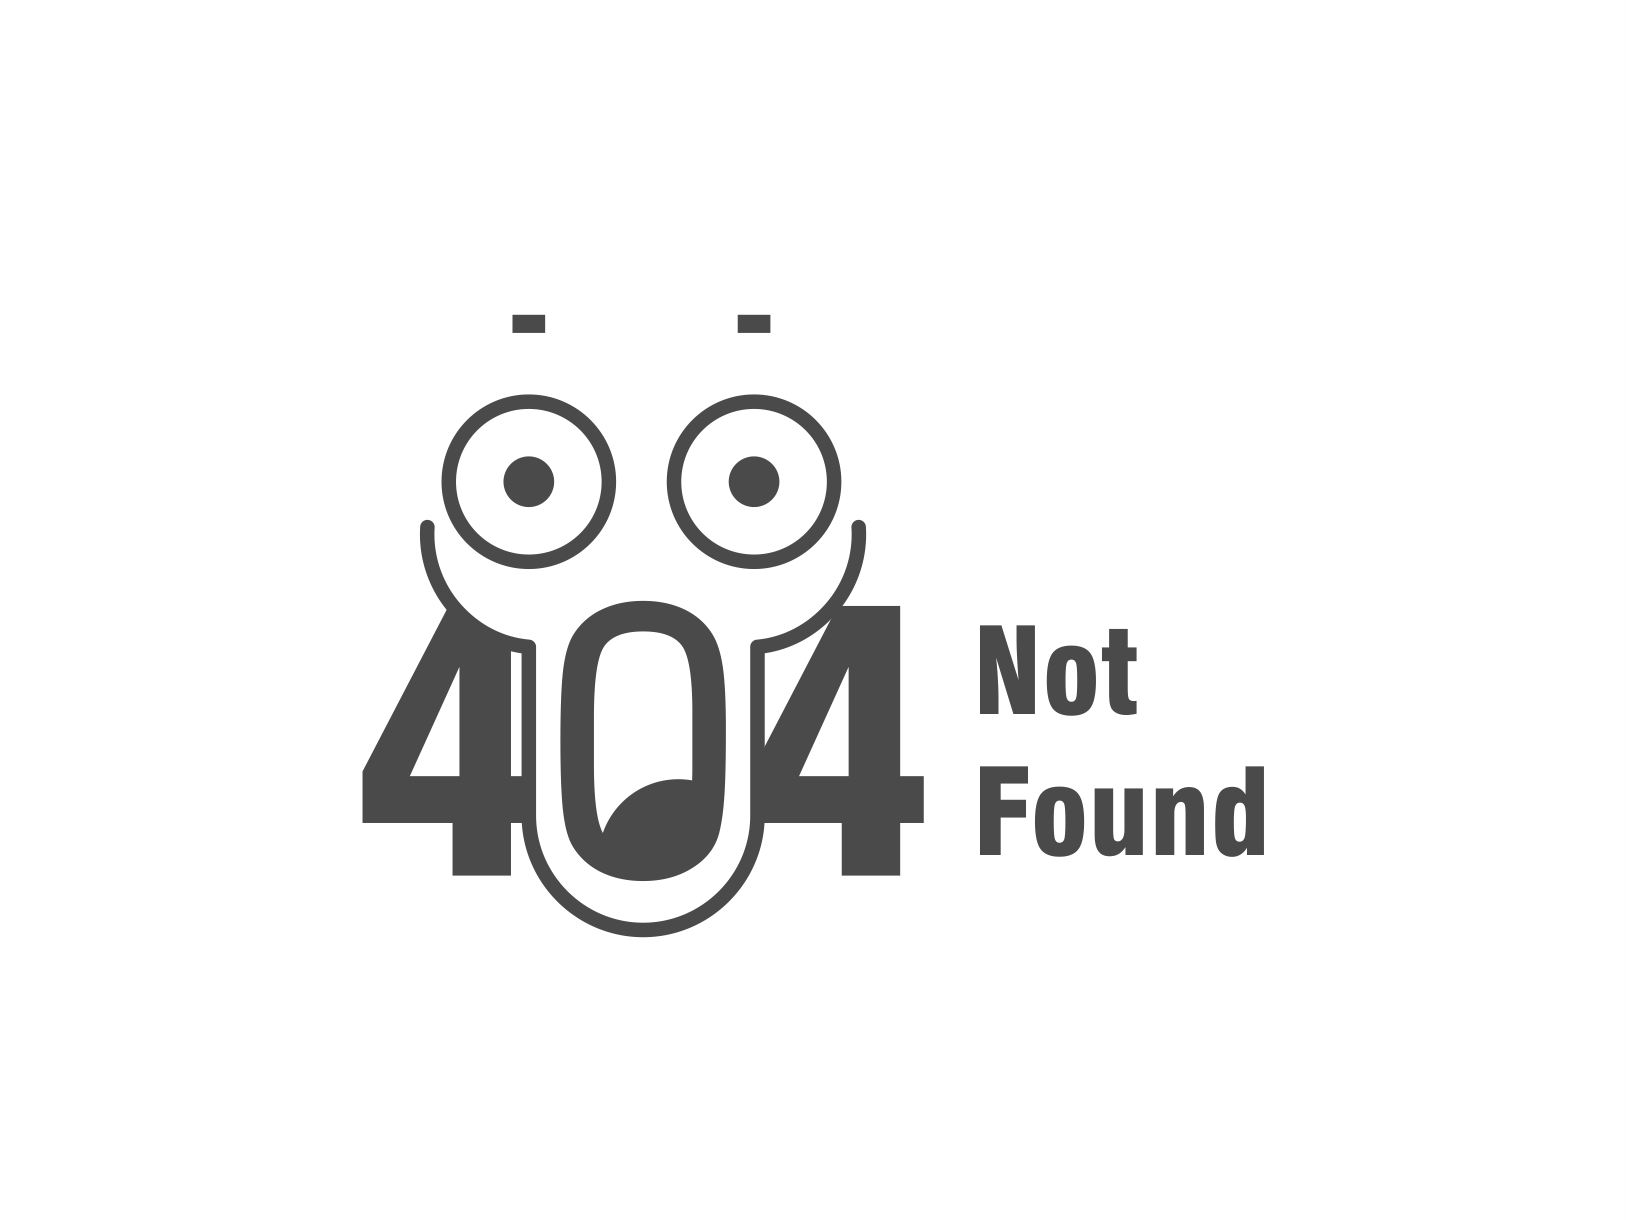 Product not found. 404 Not found. Аватарка not found. 404 Аватарка. 404 Not found Мем.